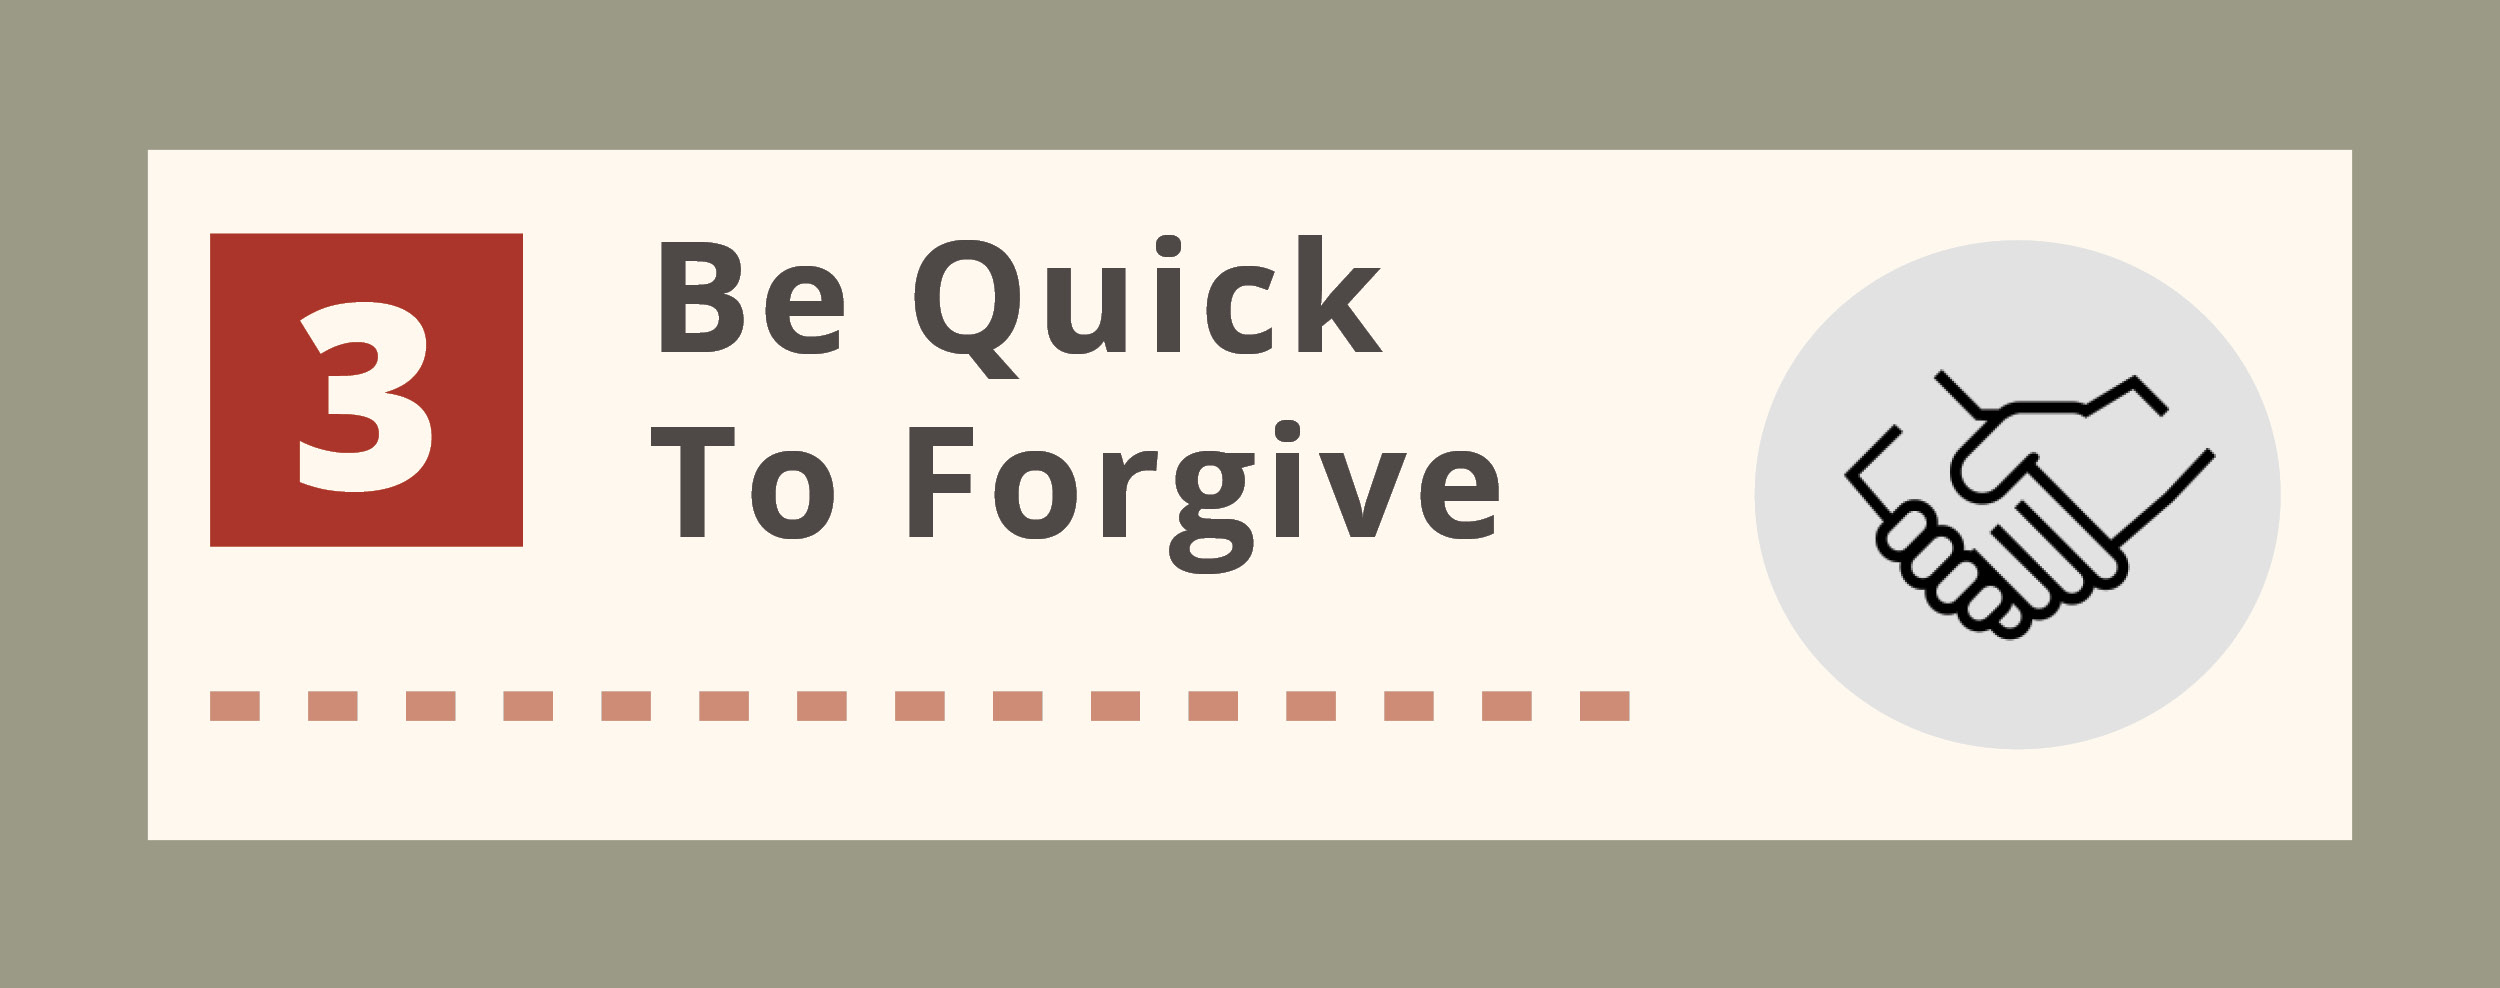 Be quick to forgive text